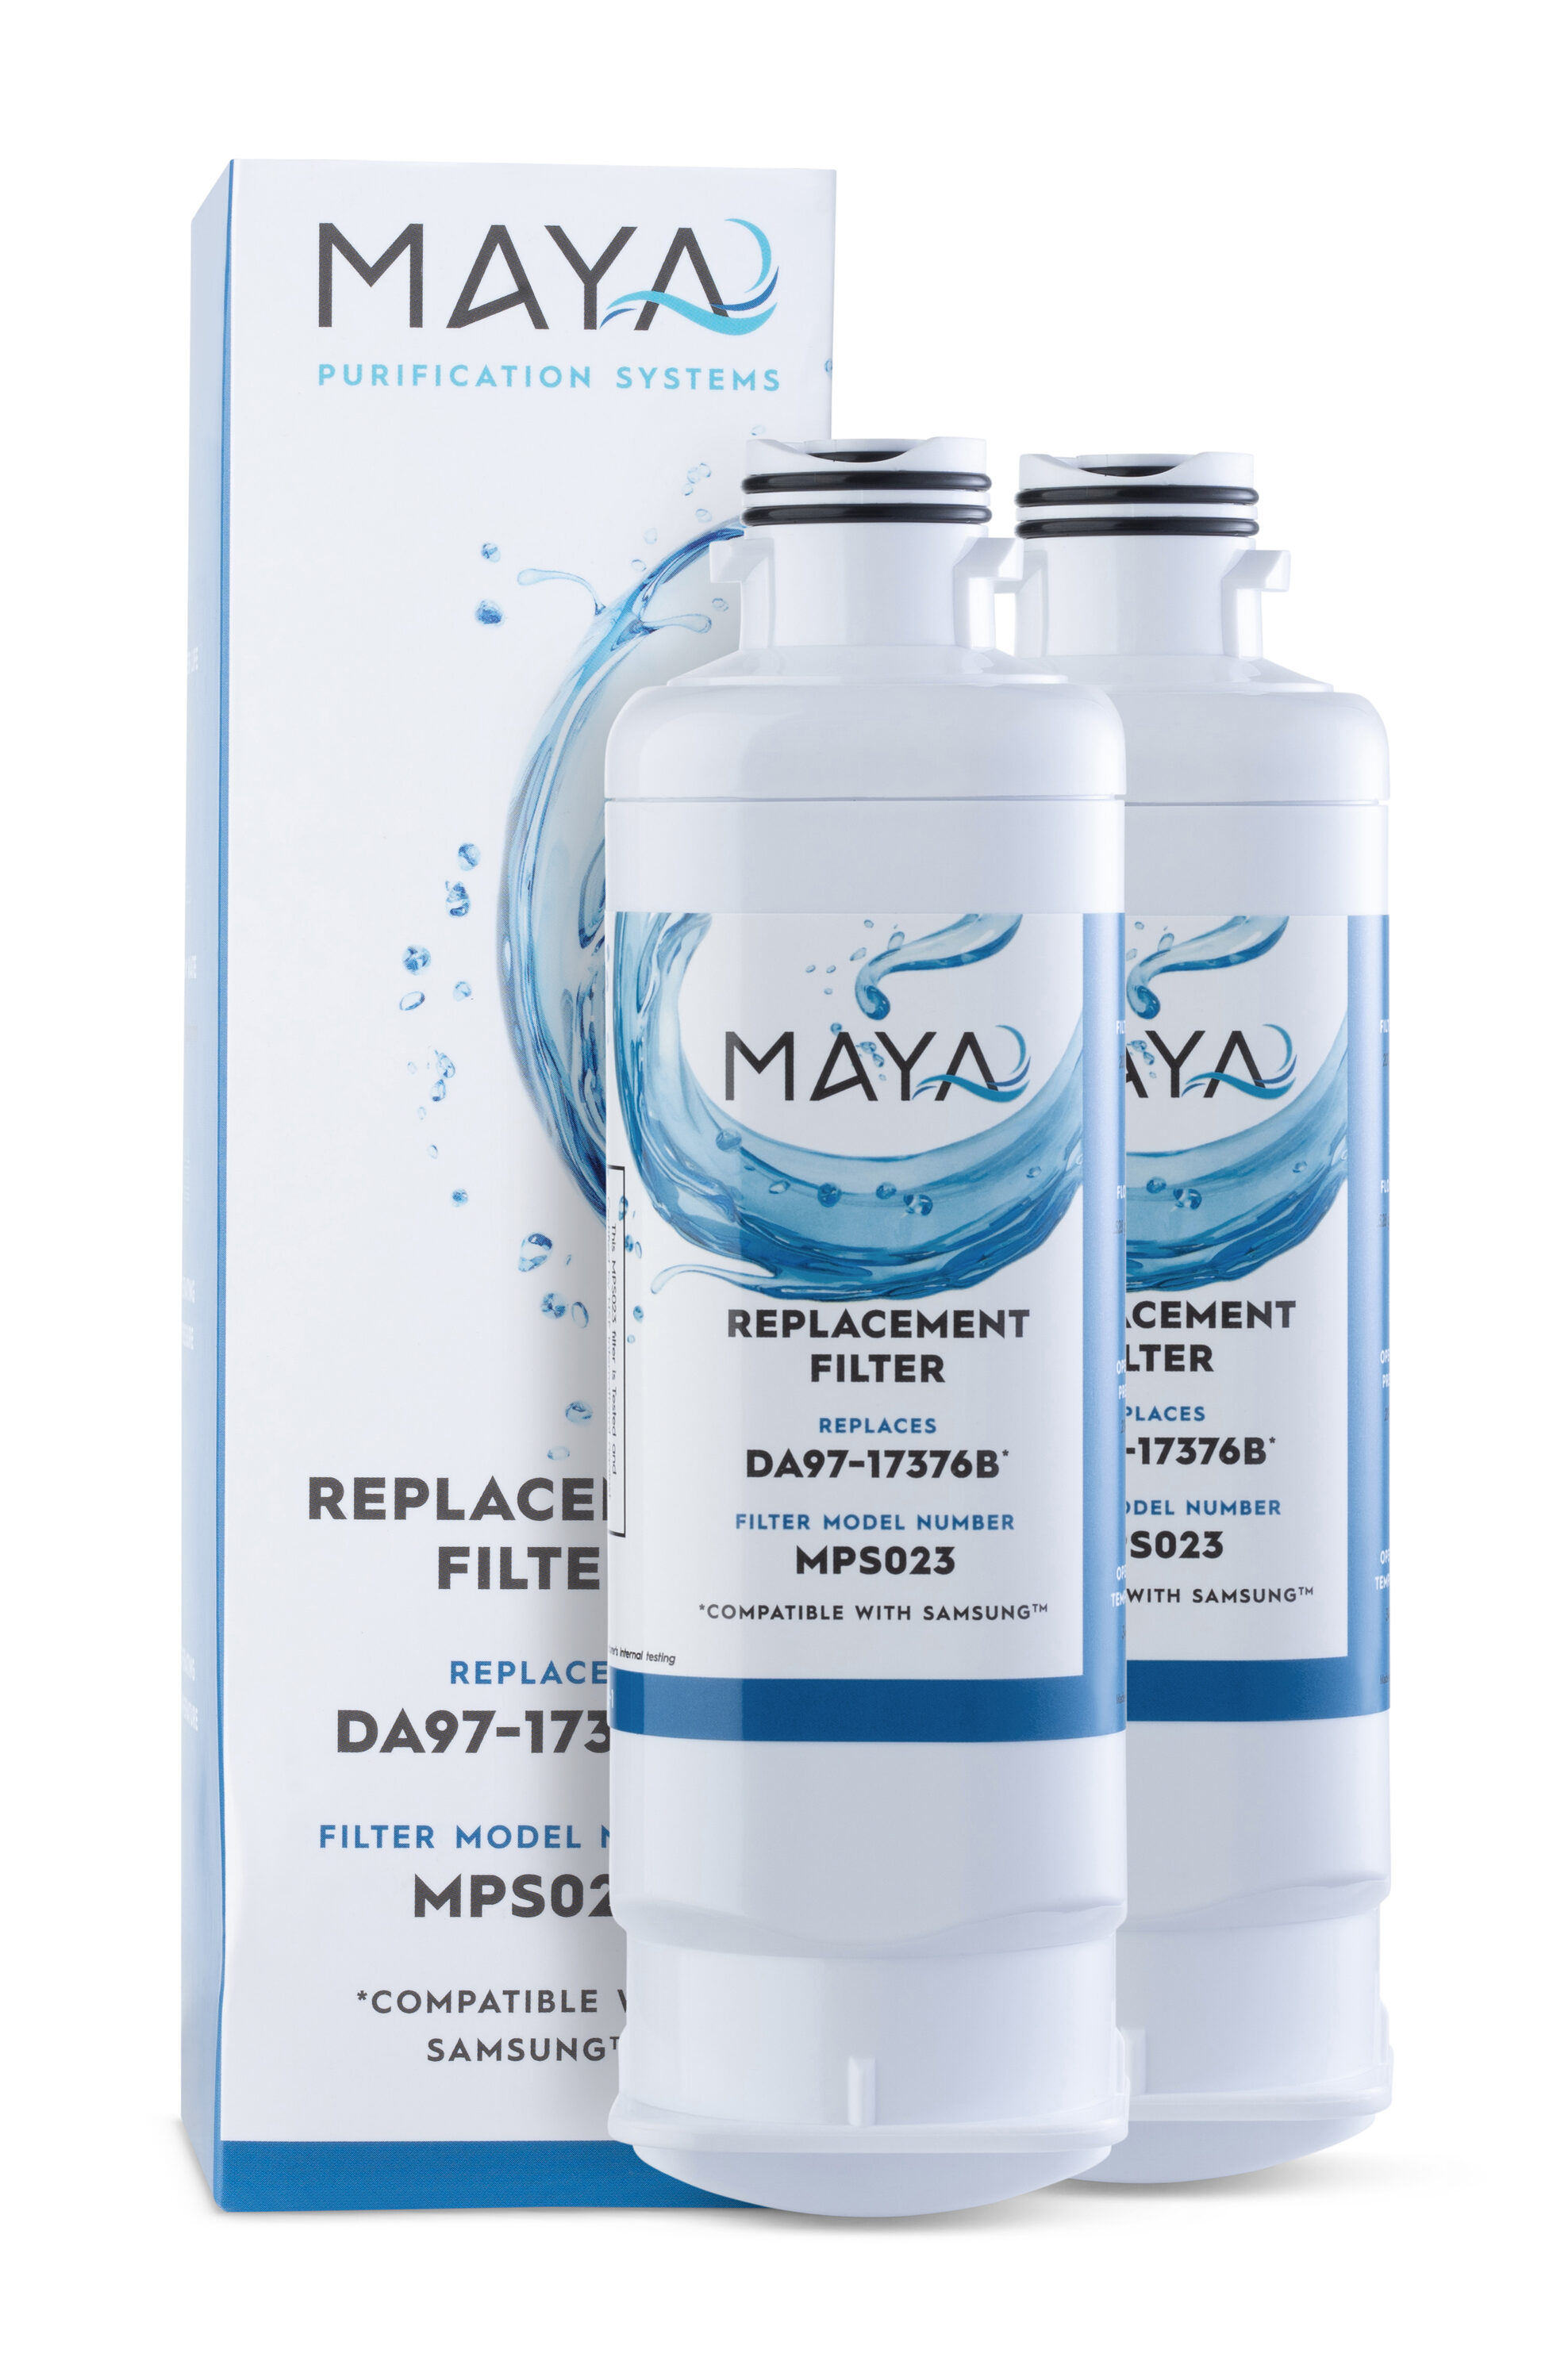 MAYA Breeze By MAYA W10311524 Replacement Refrigerator Air Filter,  Compatible with Whirlpool AIR1